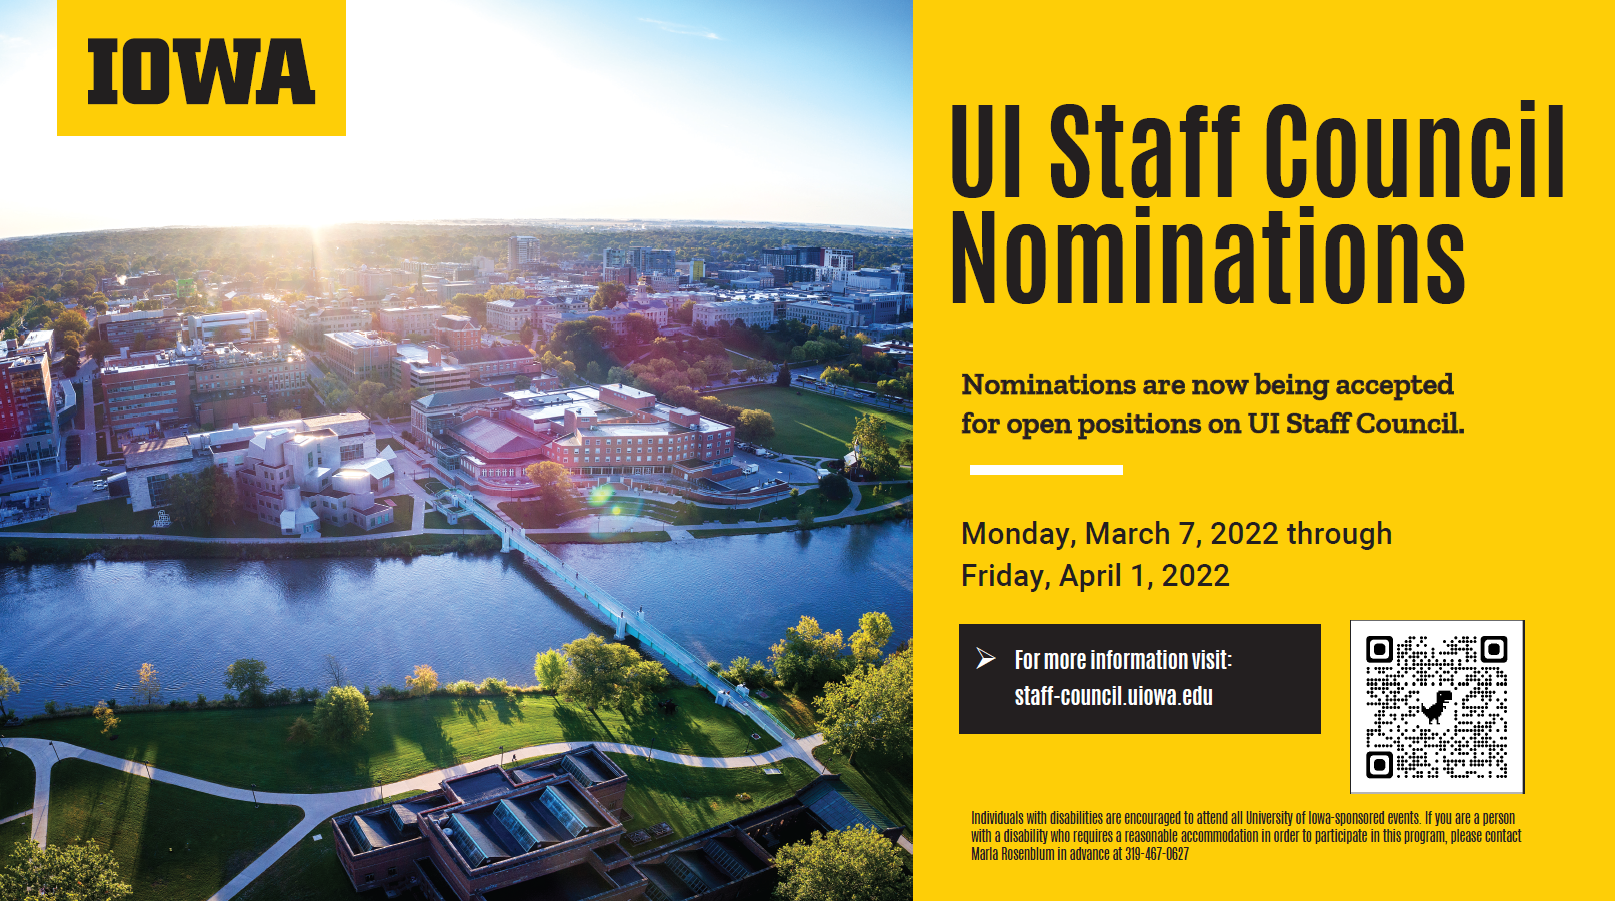 UI Staff Council Nominations Nominations will be accepted for open positions on UI Staff Council. Monday, March 7 through Friday, April 1. Open forum/info session for staff members interested in running for staff council is planned for Tuesday, March 8 at 12 noon. For more information and to register, visit staff-council.uiowa.edu